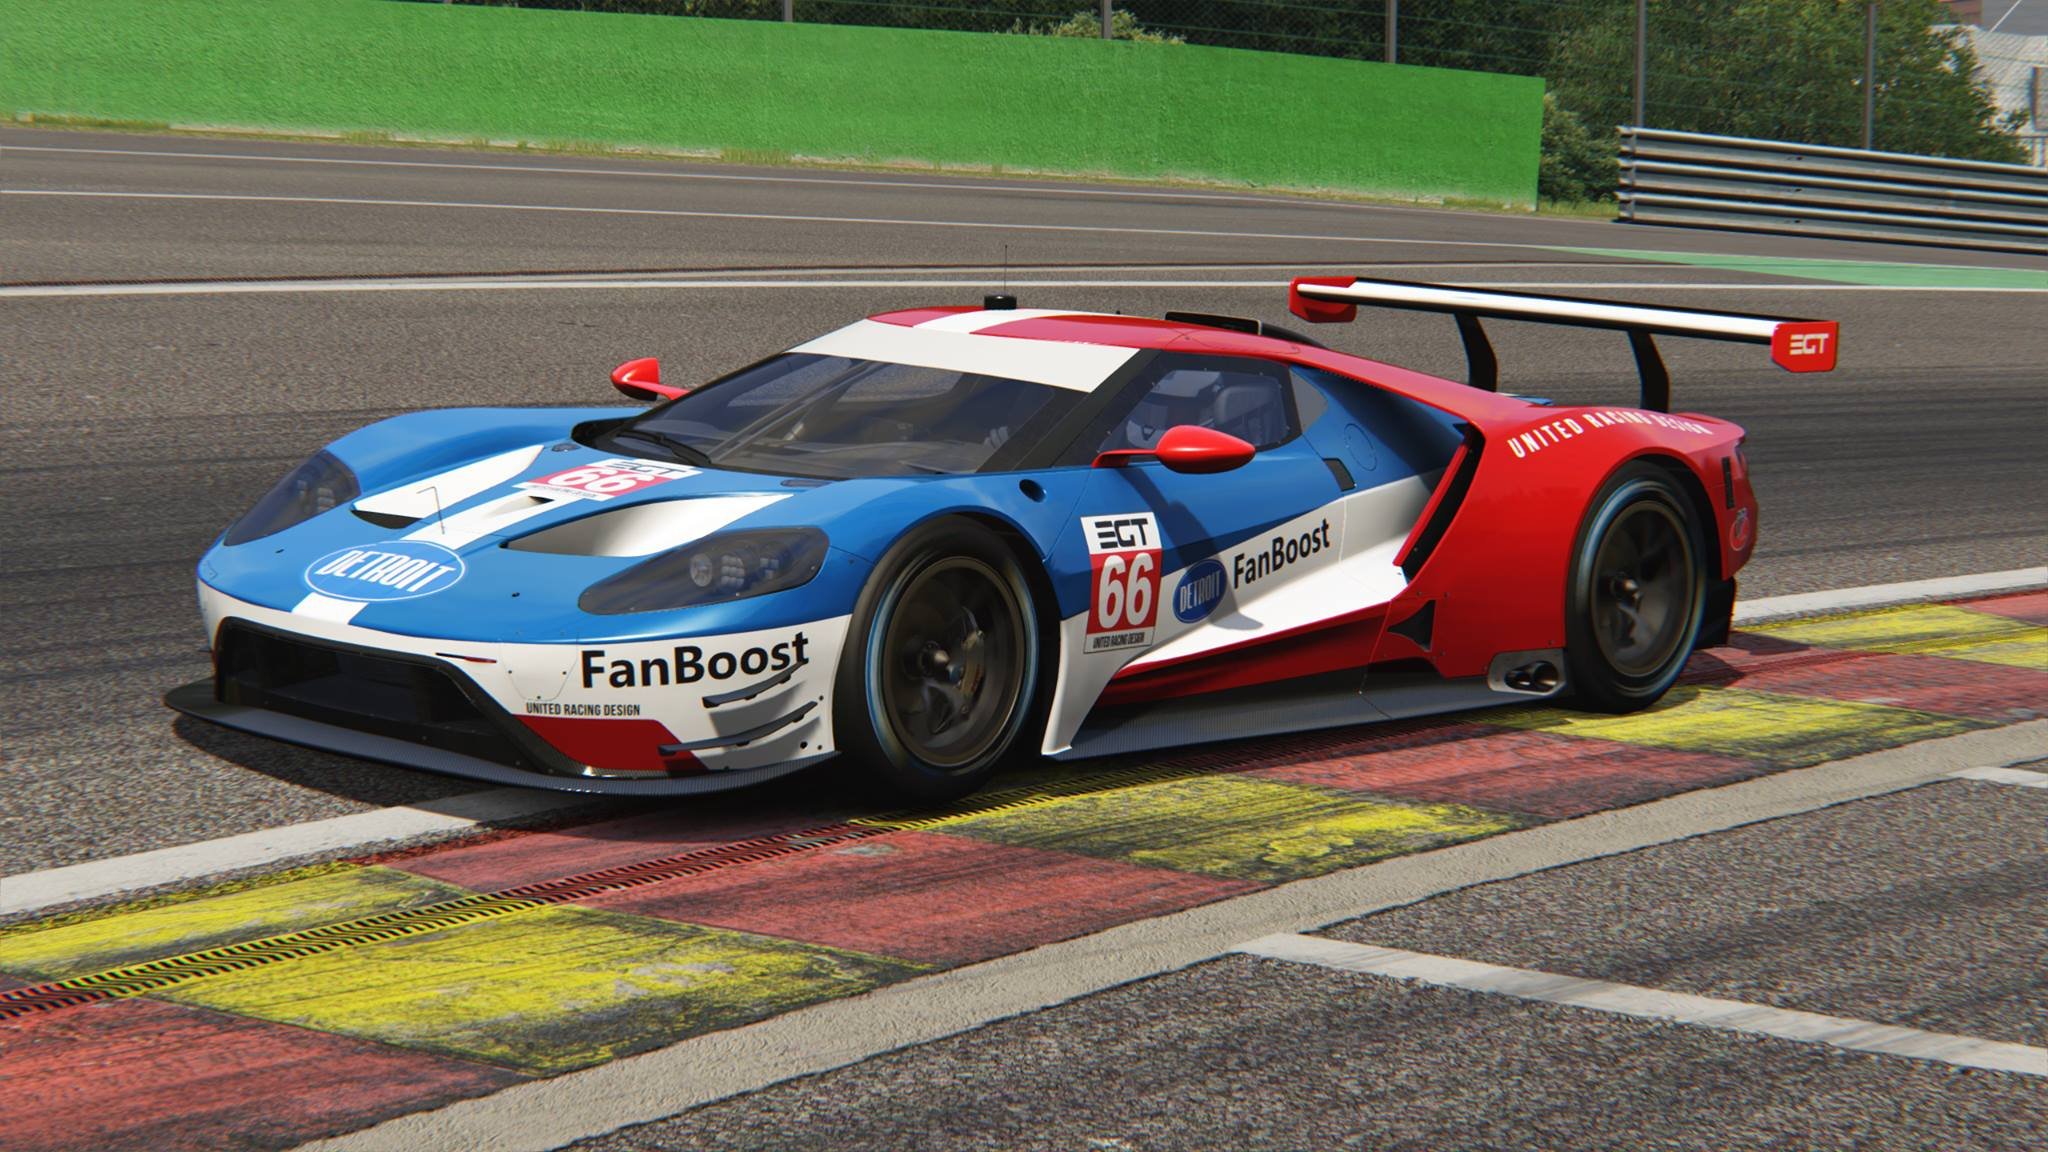 More information about "Assetto Corsa: Detroit EGT (Ford GTE) by URD disponibile"